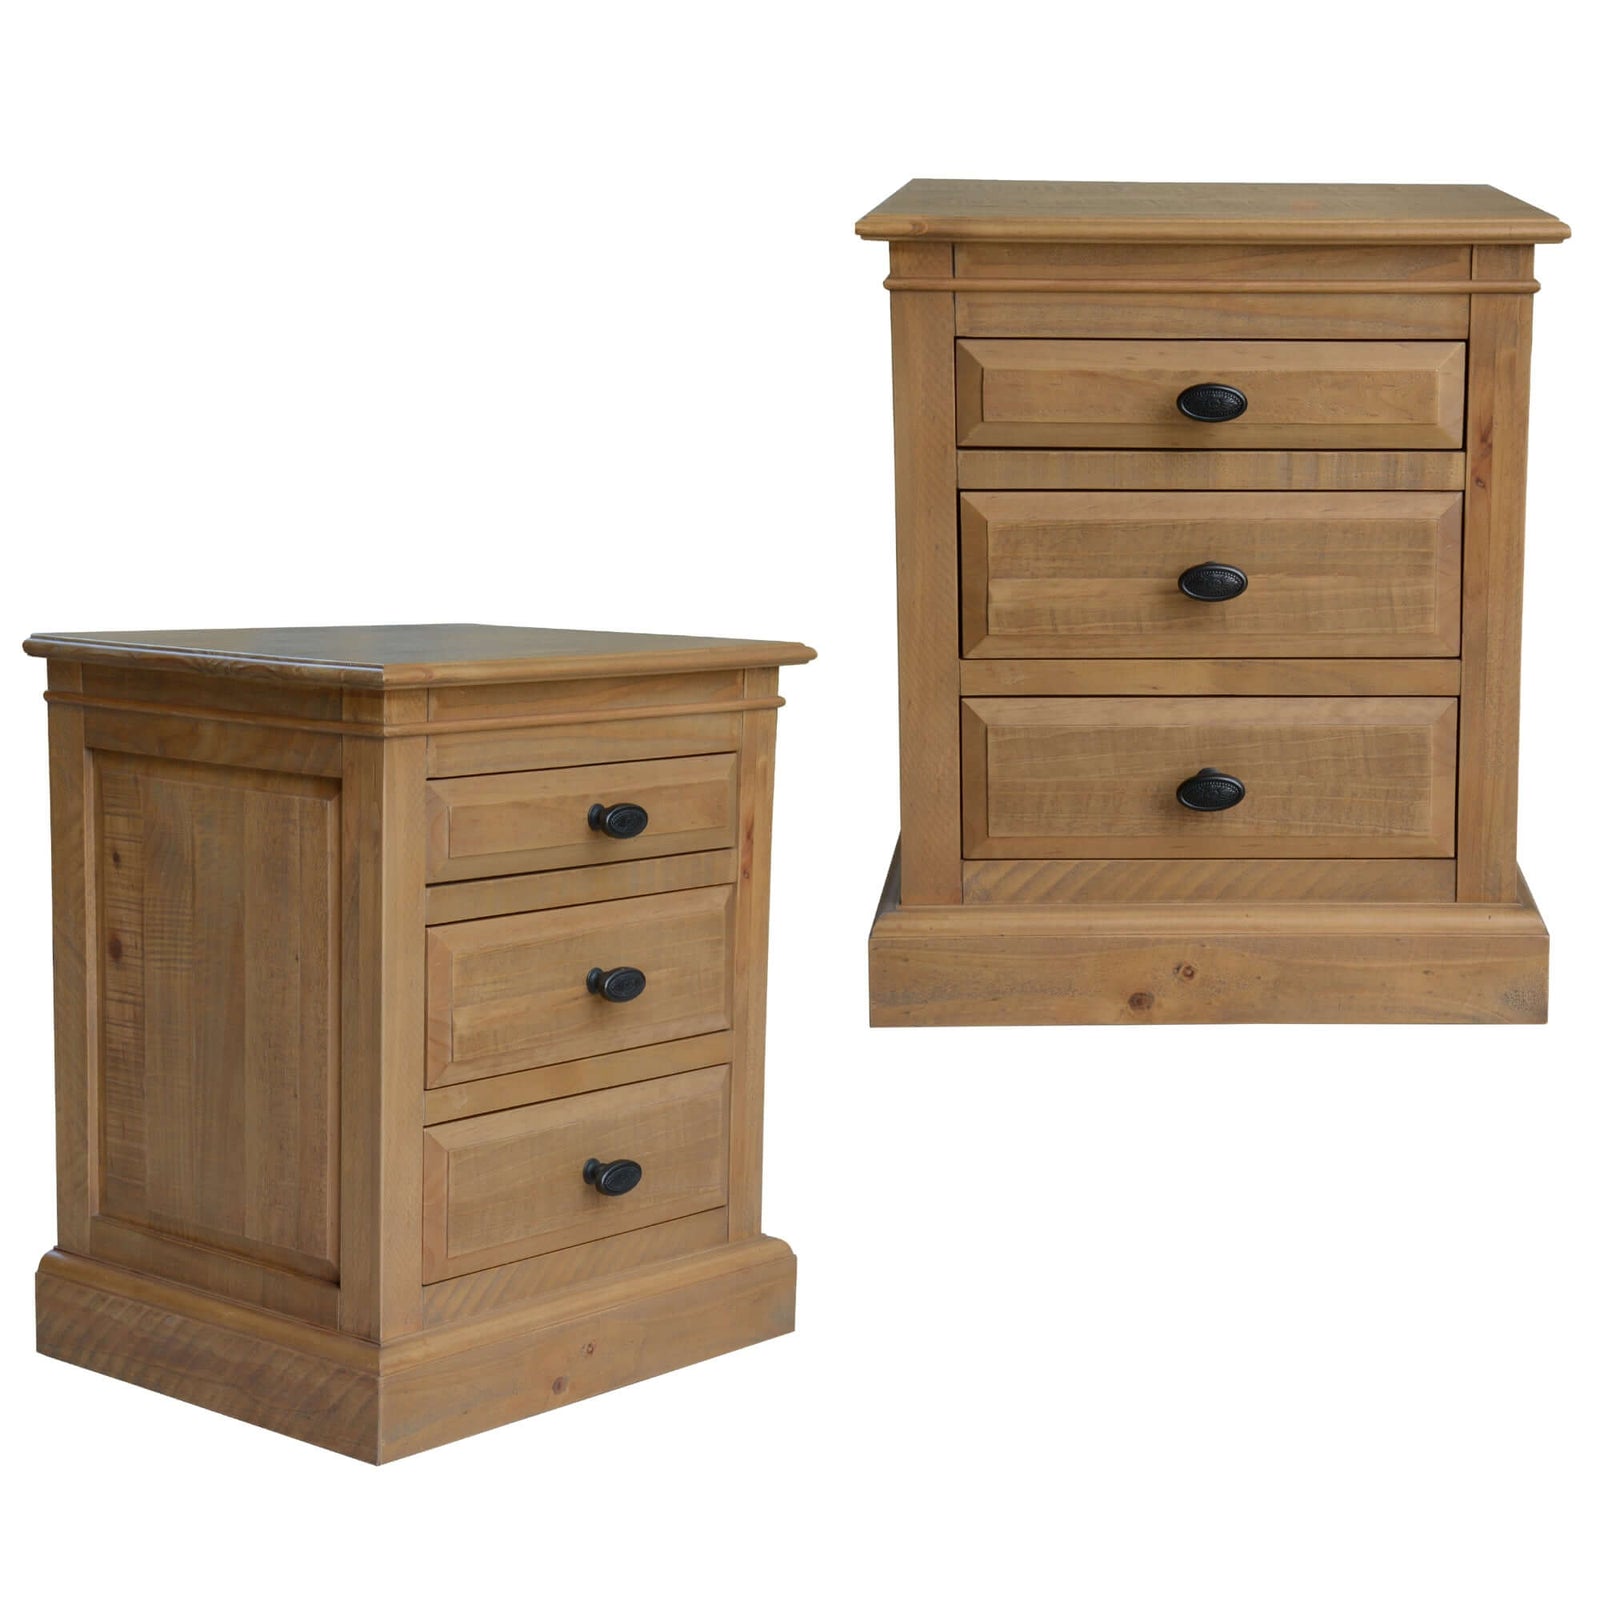 Jade Set of 2 Bedside Table 3 Drawers Storage Cabinet Nightstand - Natural-Upinteriors